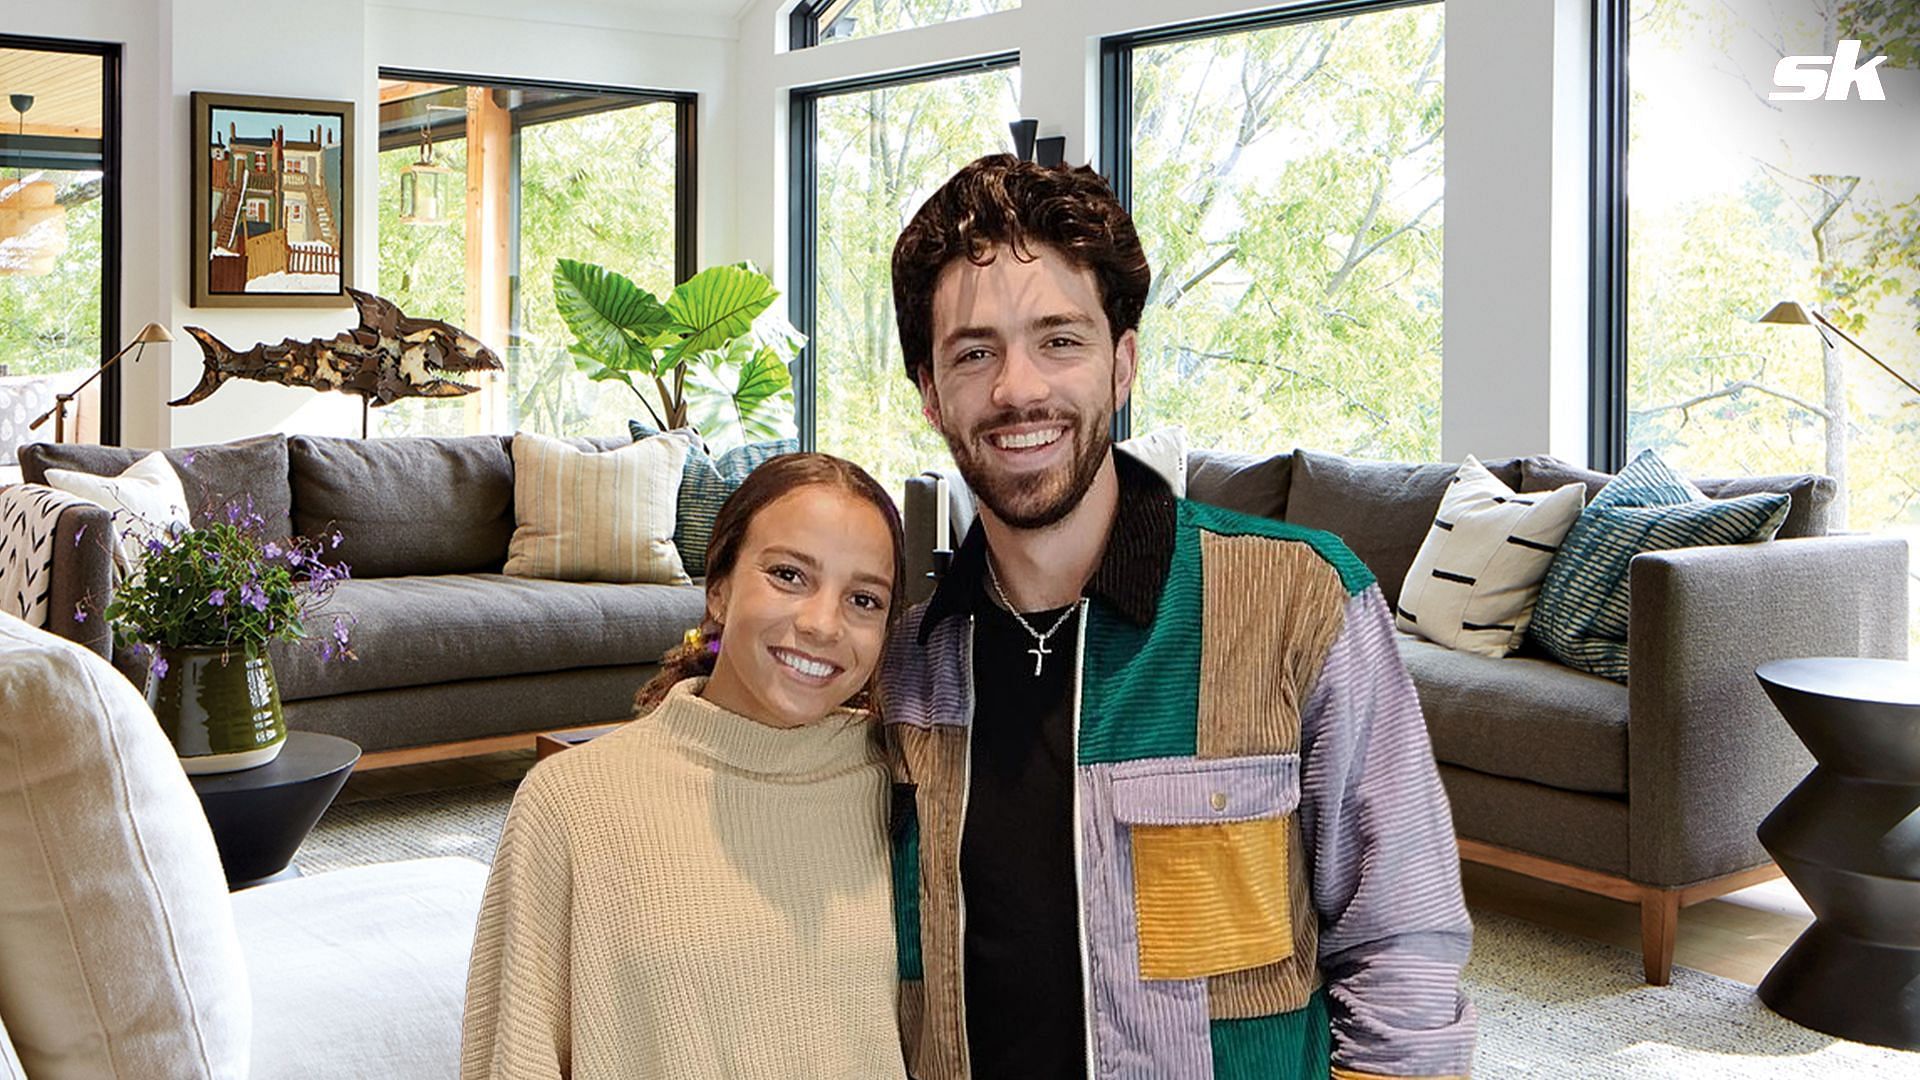 Dansby Swanson is married to Mallory Pugh